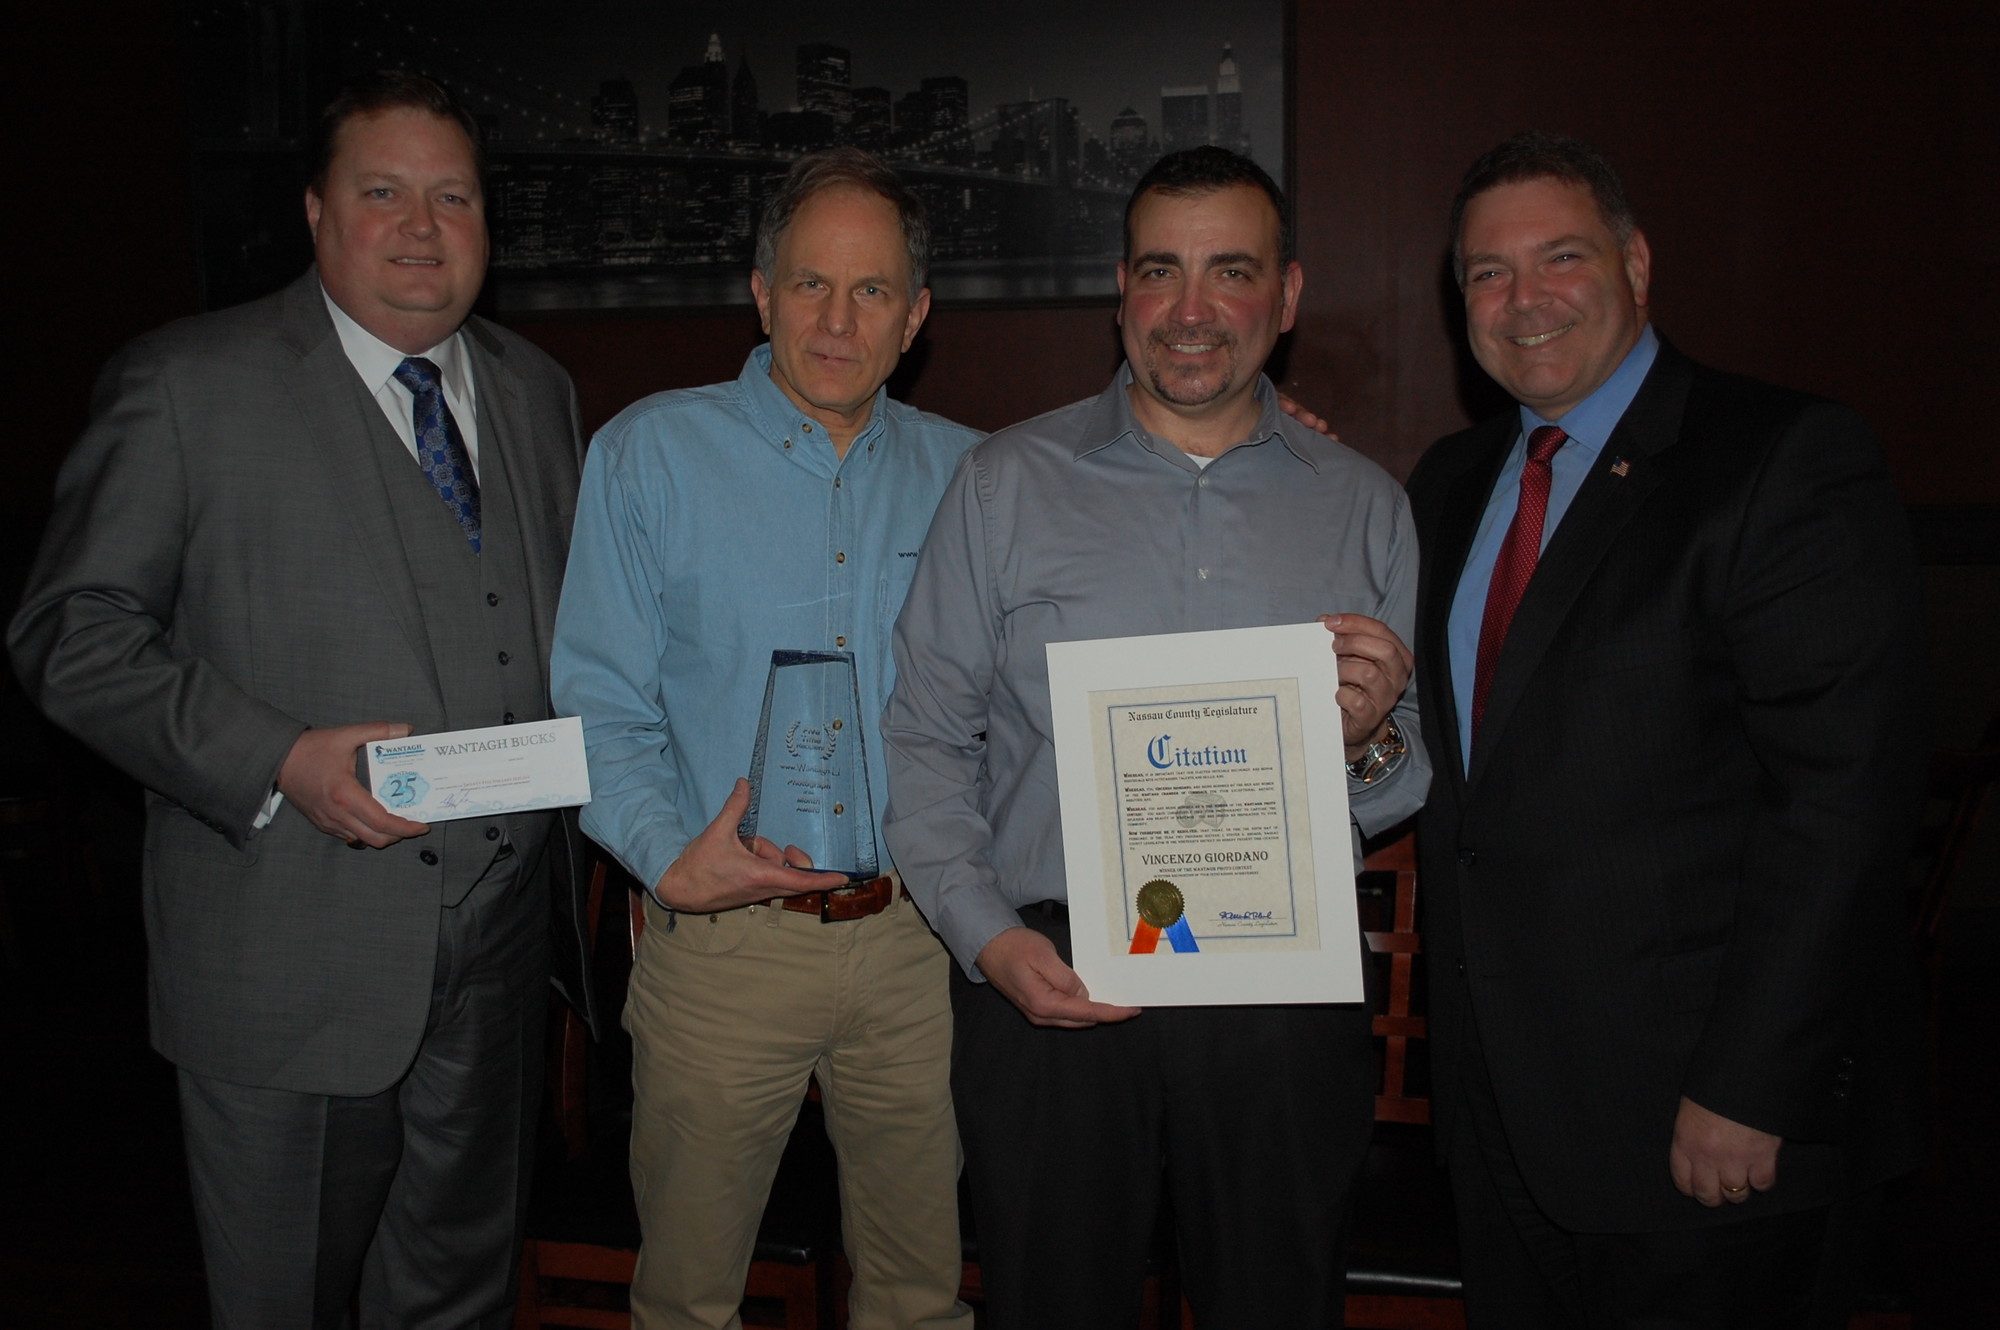 Vincenzo Giordano, second from right, was recognized as a five-time winner in the Wantagh.Li photo contest. Joining him were Chamber of Commerce President Chris Brown, Jim Colotti and Legislator Steve Rhoads.